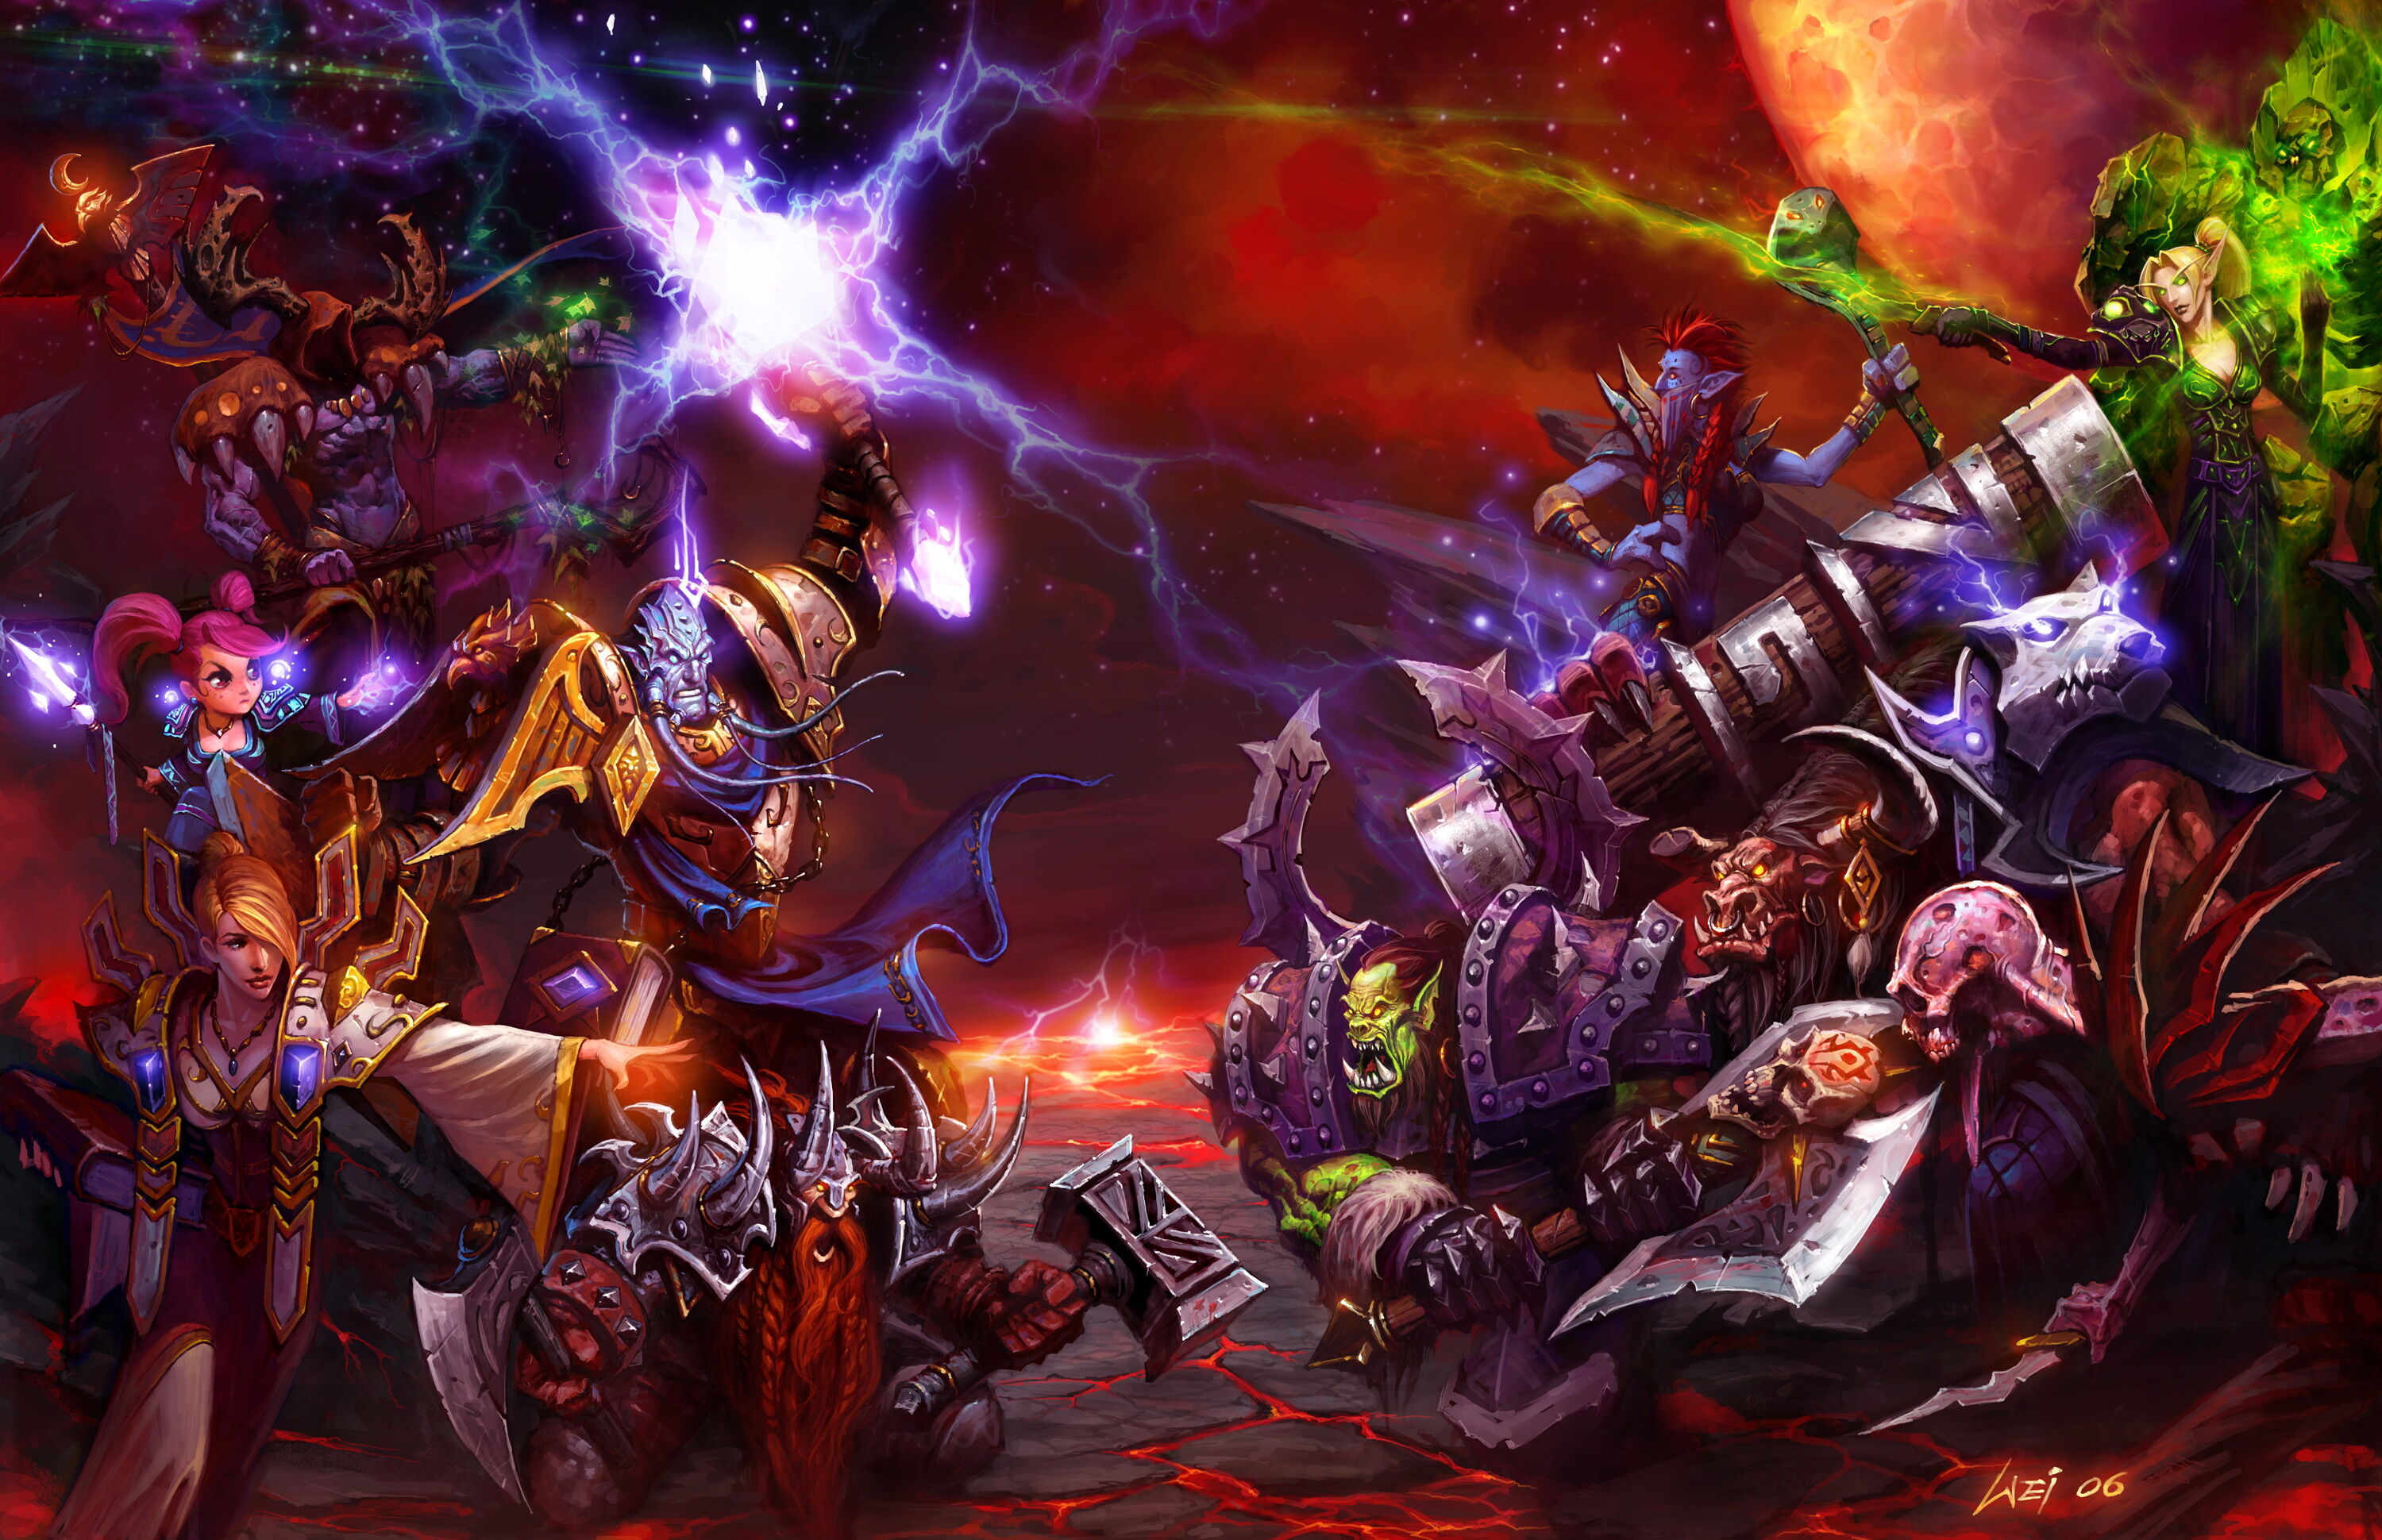 For Azeroth! It's time World of Warcraft left Alliance versus Horde in the  past for good